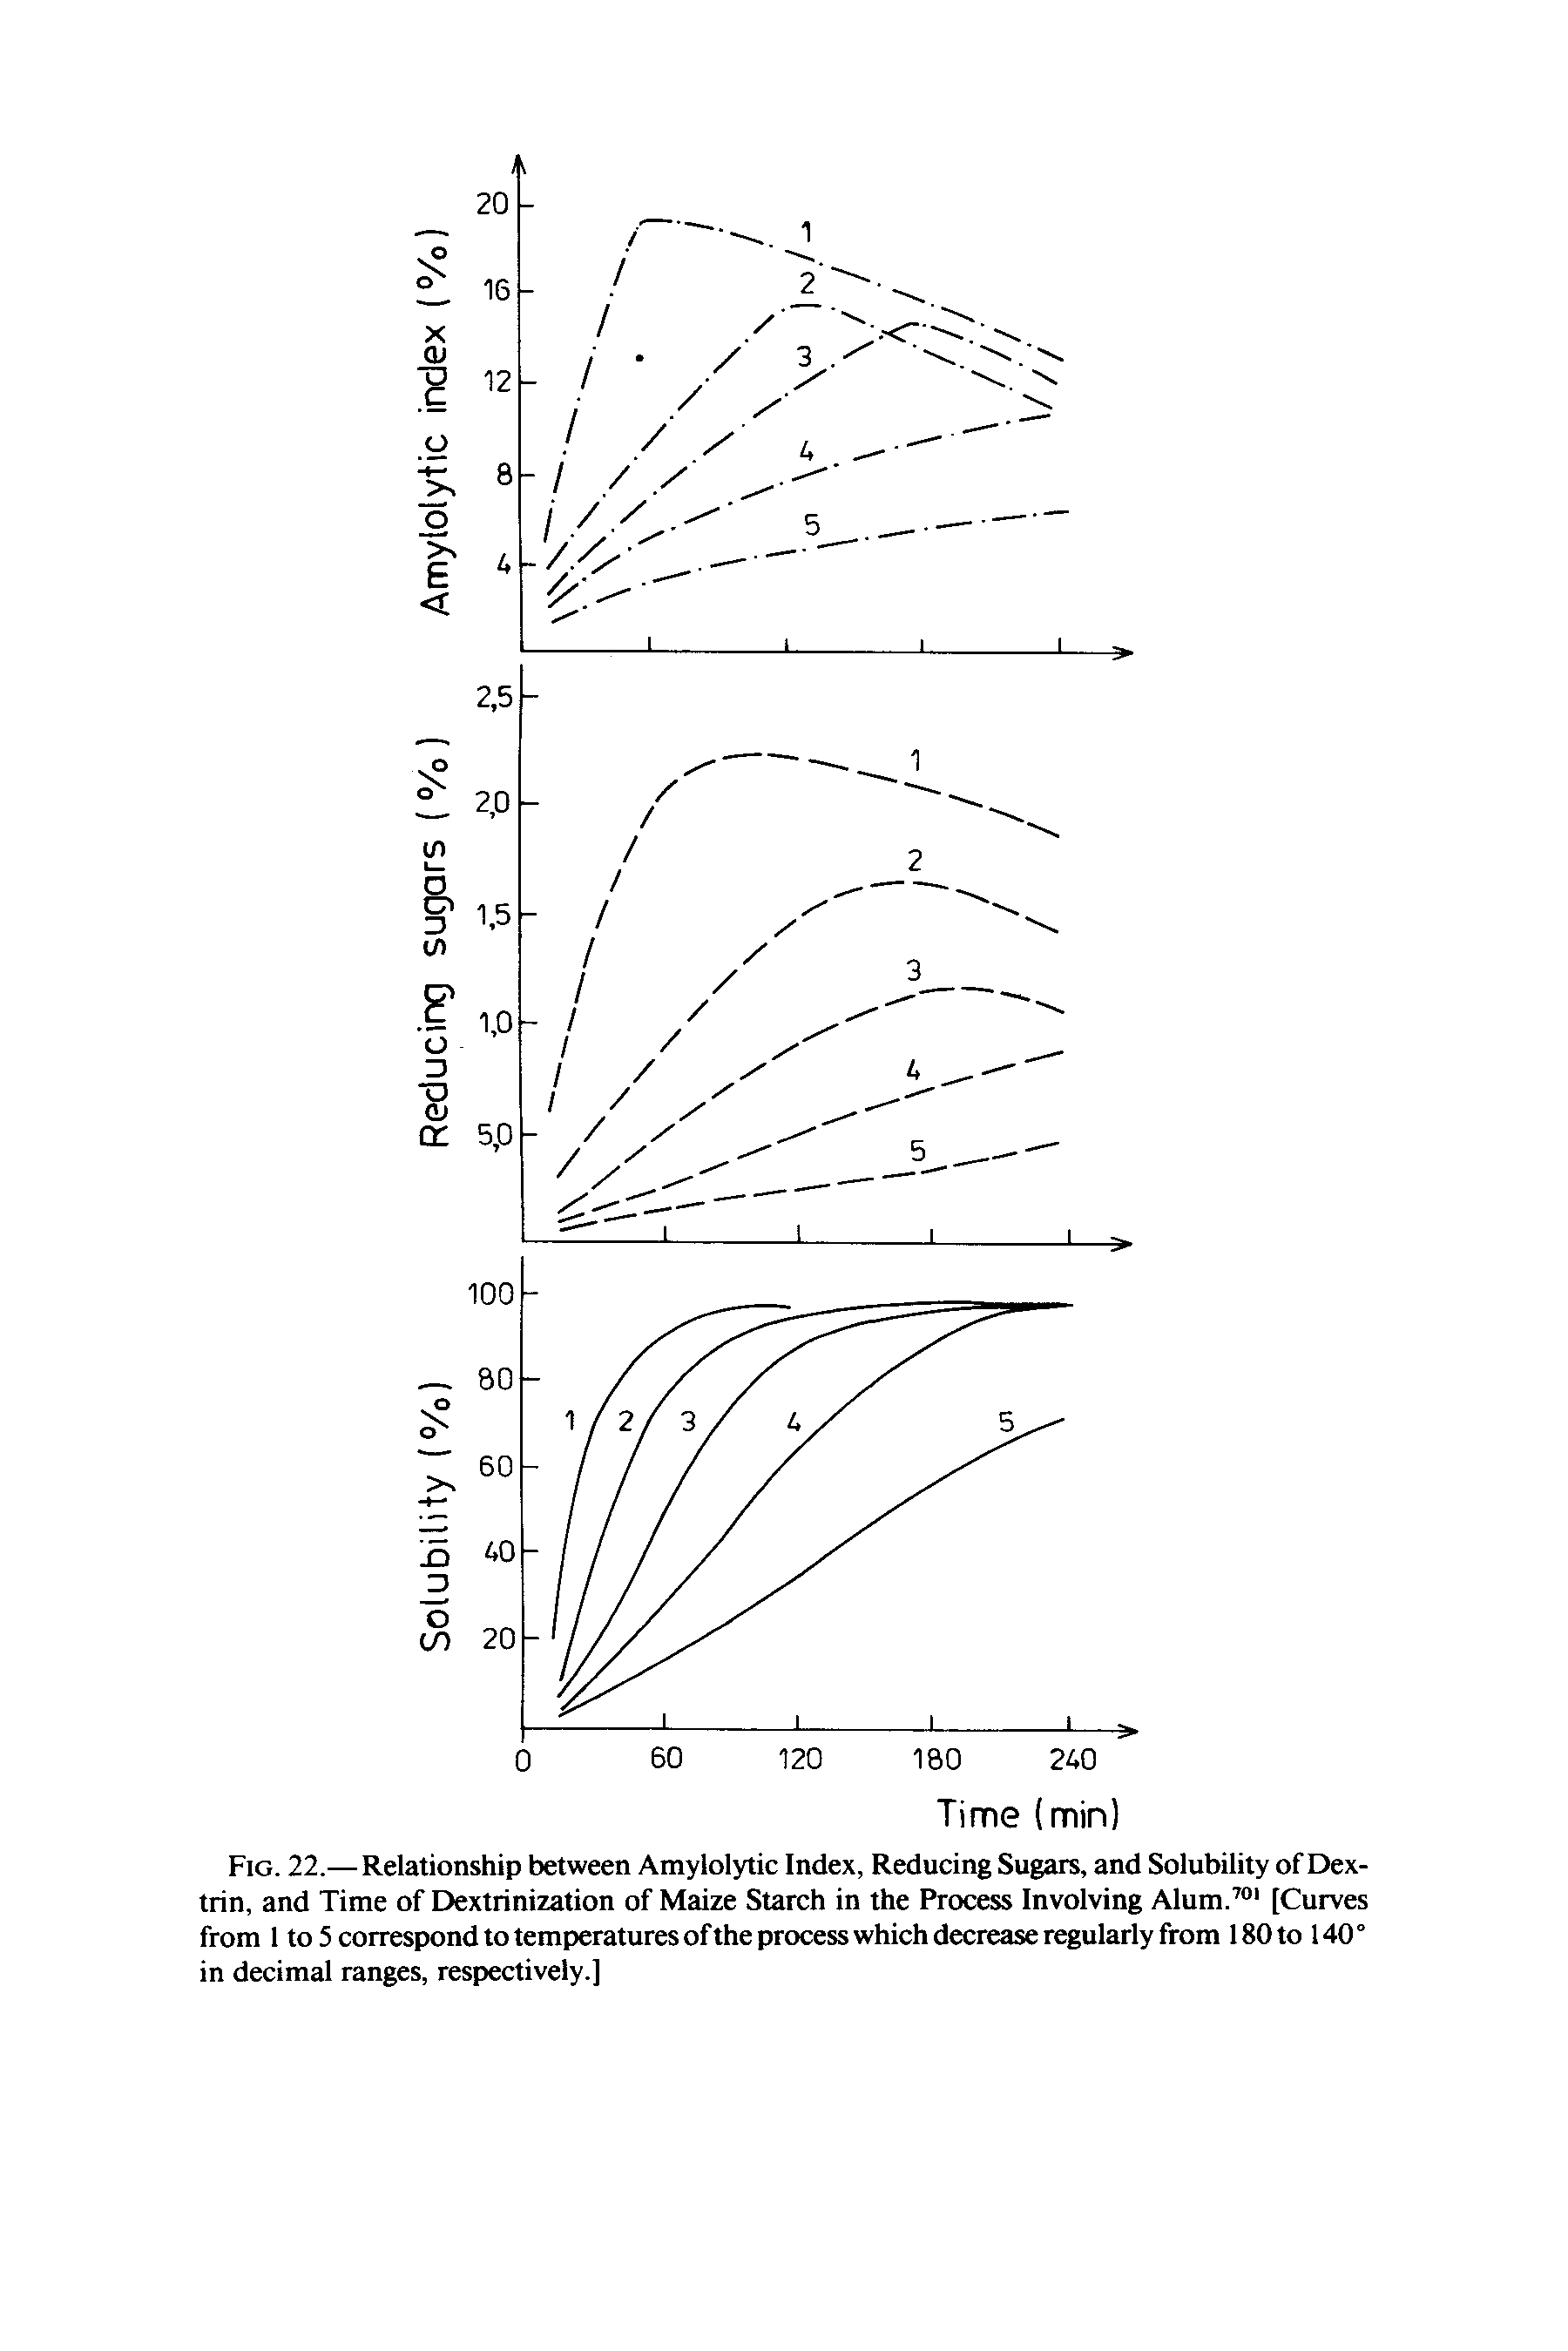 Fig. 22.— Relationship between Amylolytic Index, Reducing Sugars, and Solubility of Dextrin, and Time of Dextrinization of Maize Starch in the Process Involving Alum. [Curves from 1 to 5 correspond to temperatures of the process which decrease regularly from 180 to 140 ° in decimal ranges, respectively.]...